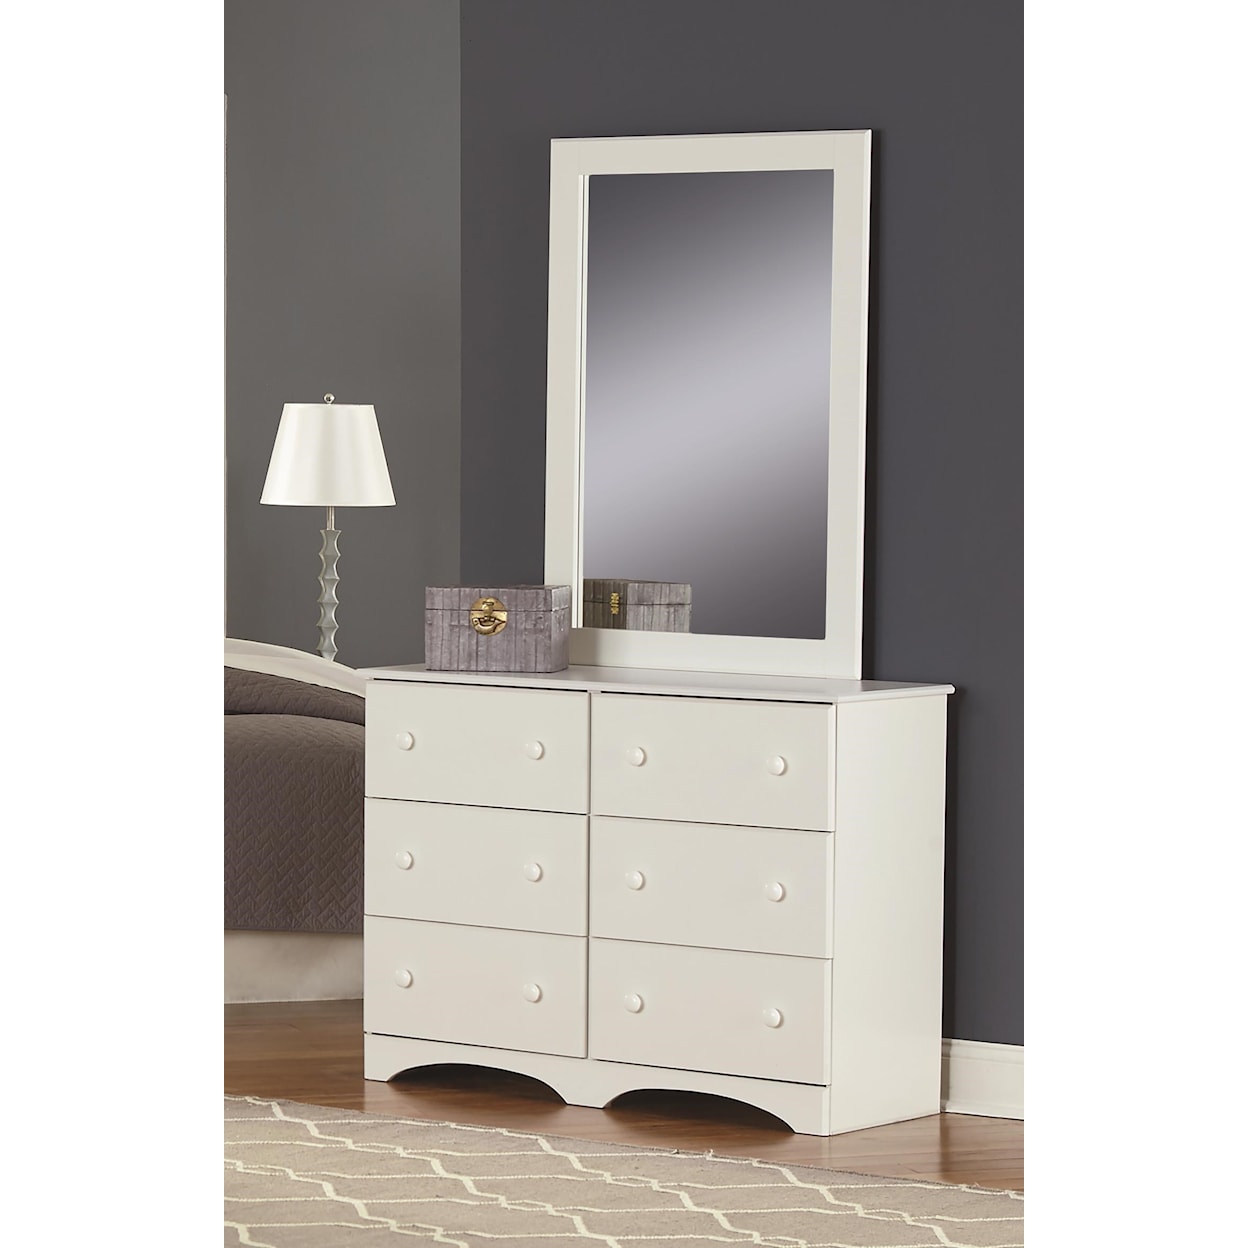 Perdue 14000 Series Dresser and Mirror Package